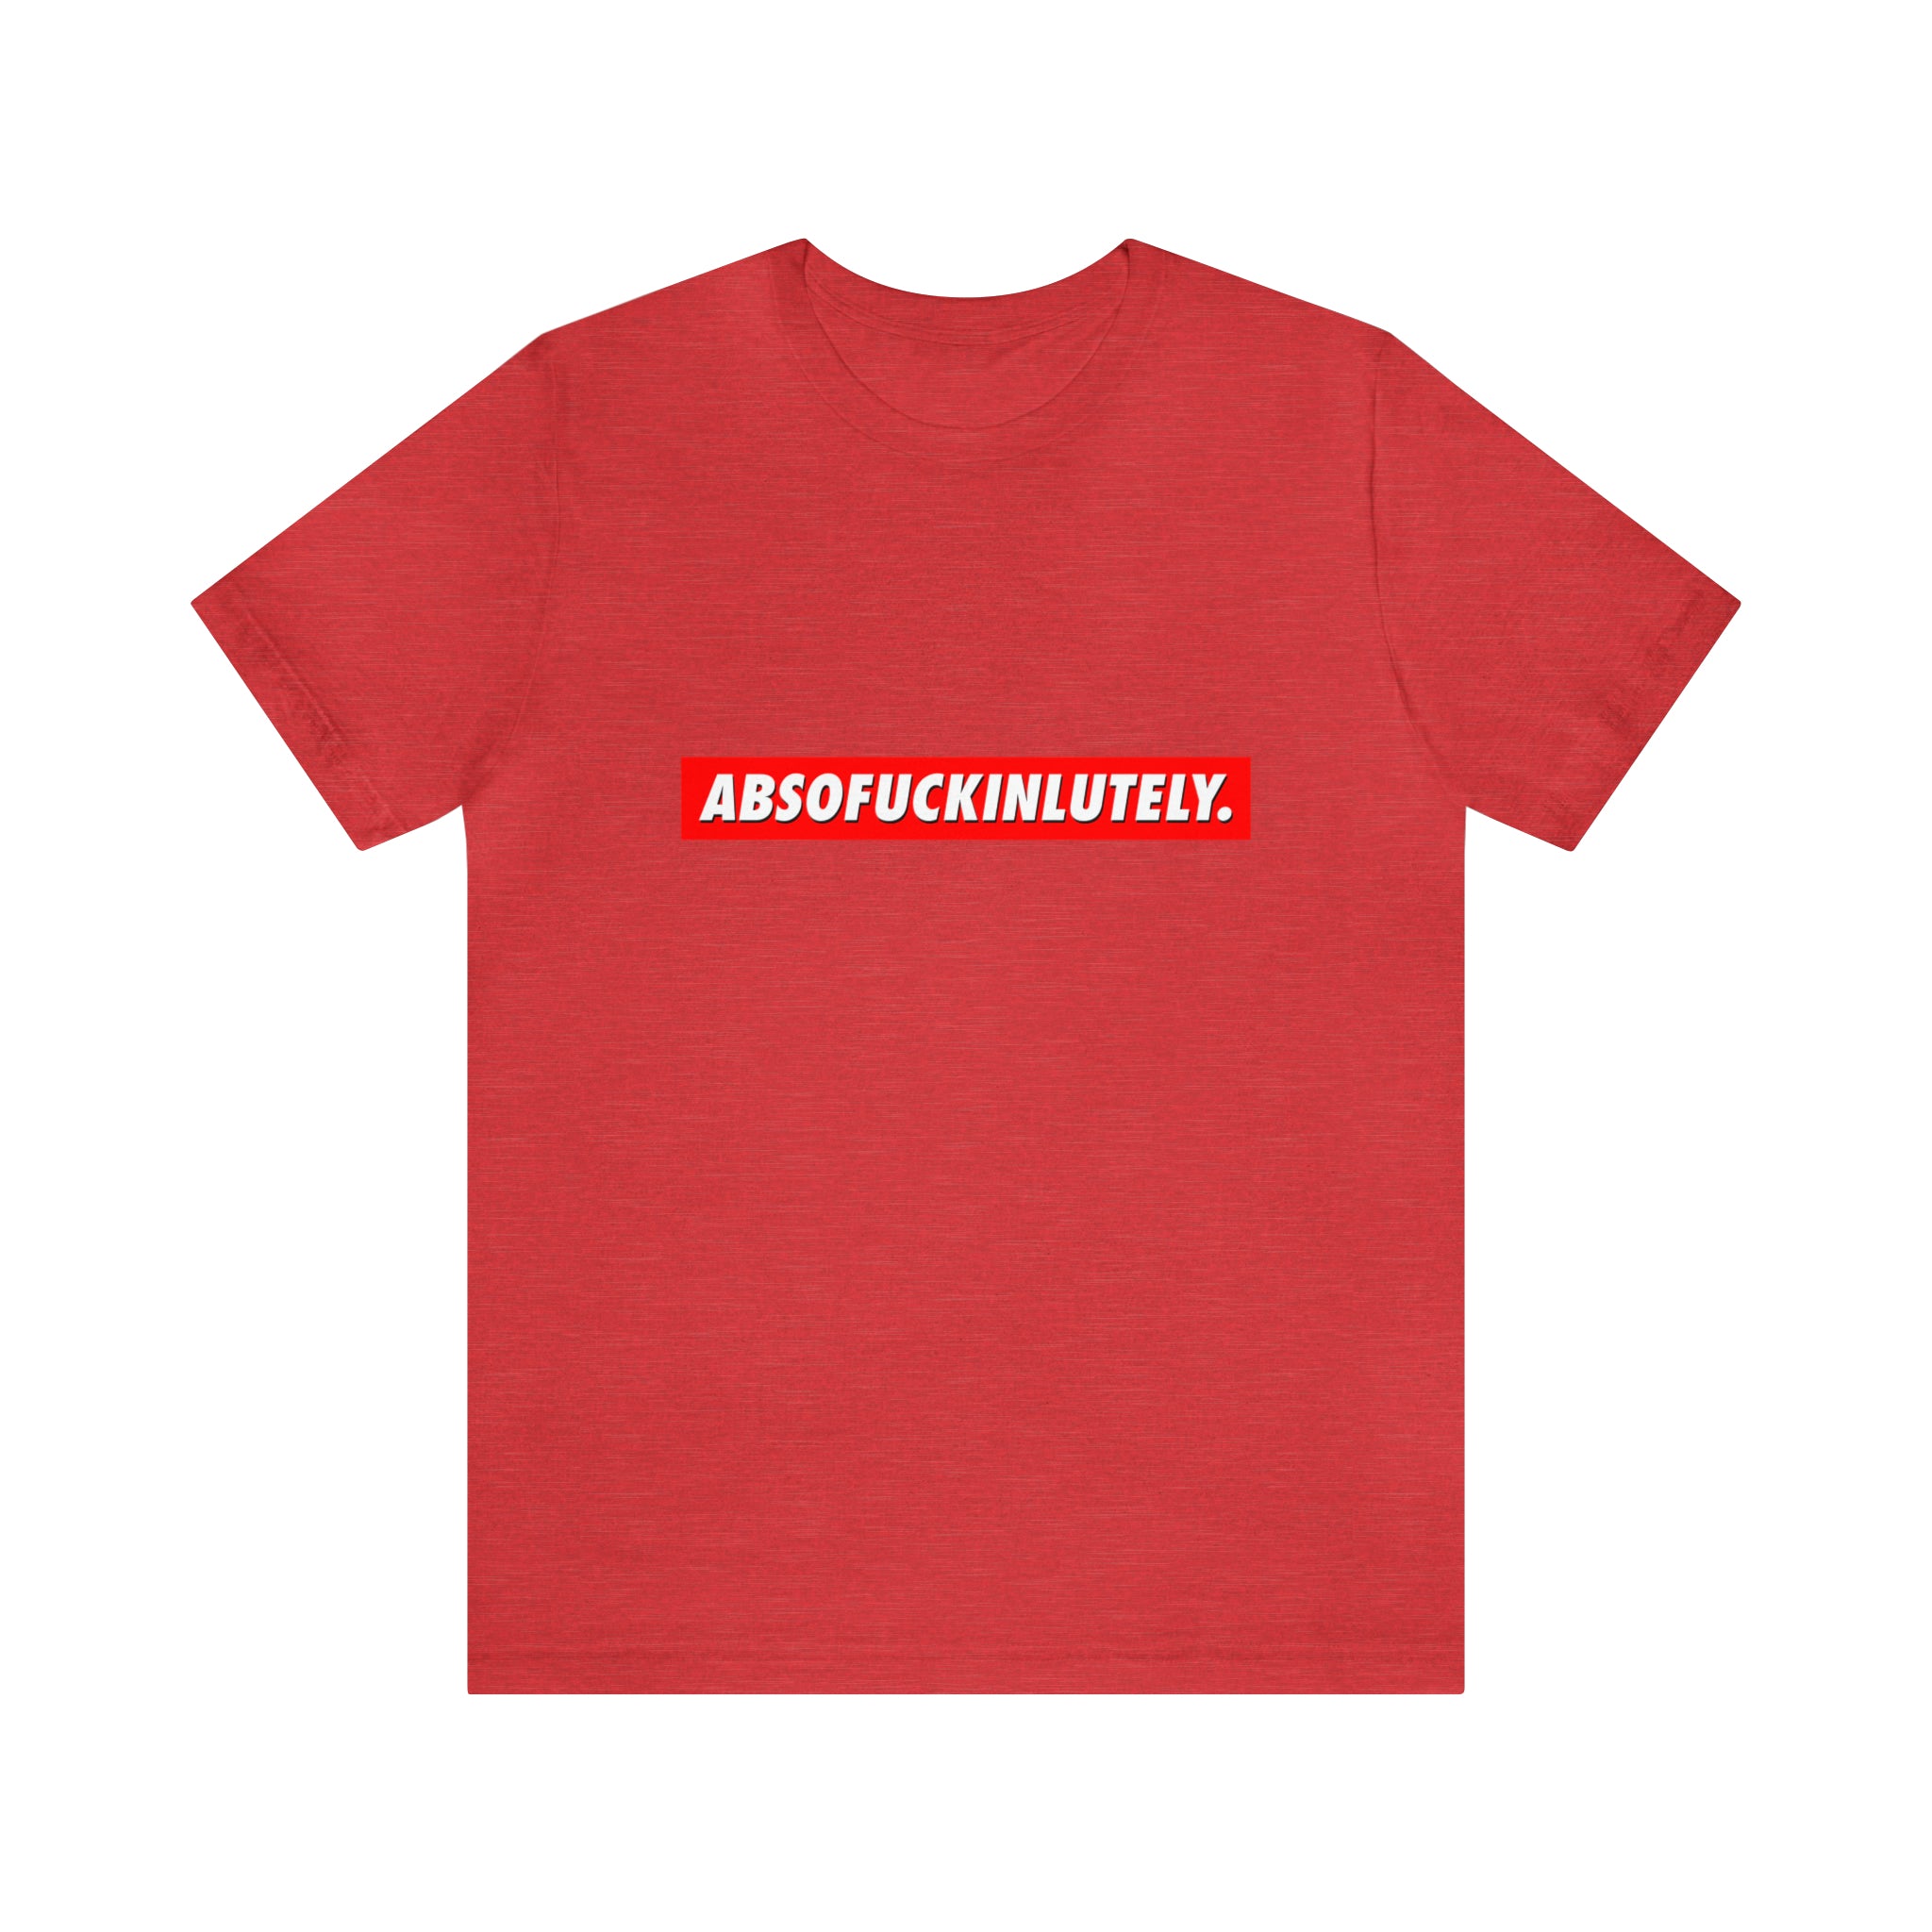 An eye-catching red Absofuckinlutely T-Shirt with the word 'adventurous' printed on it.